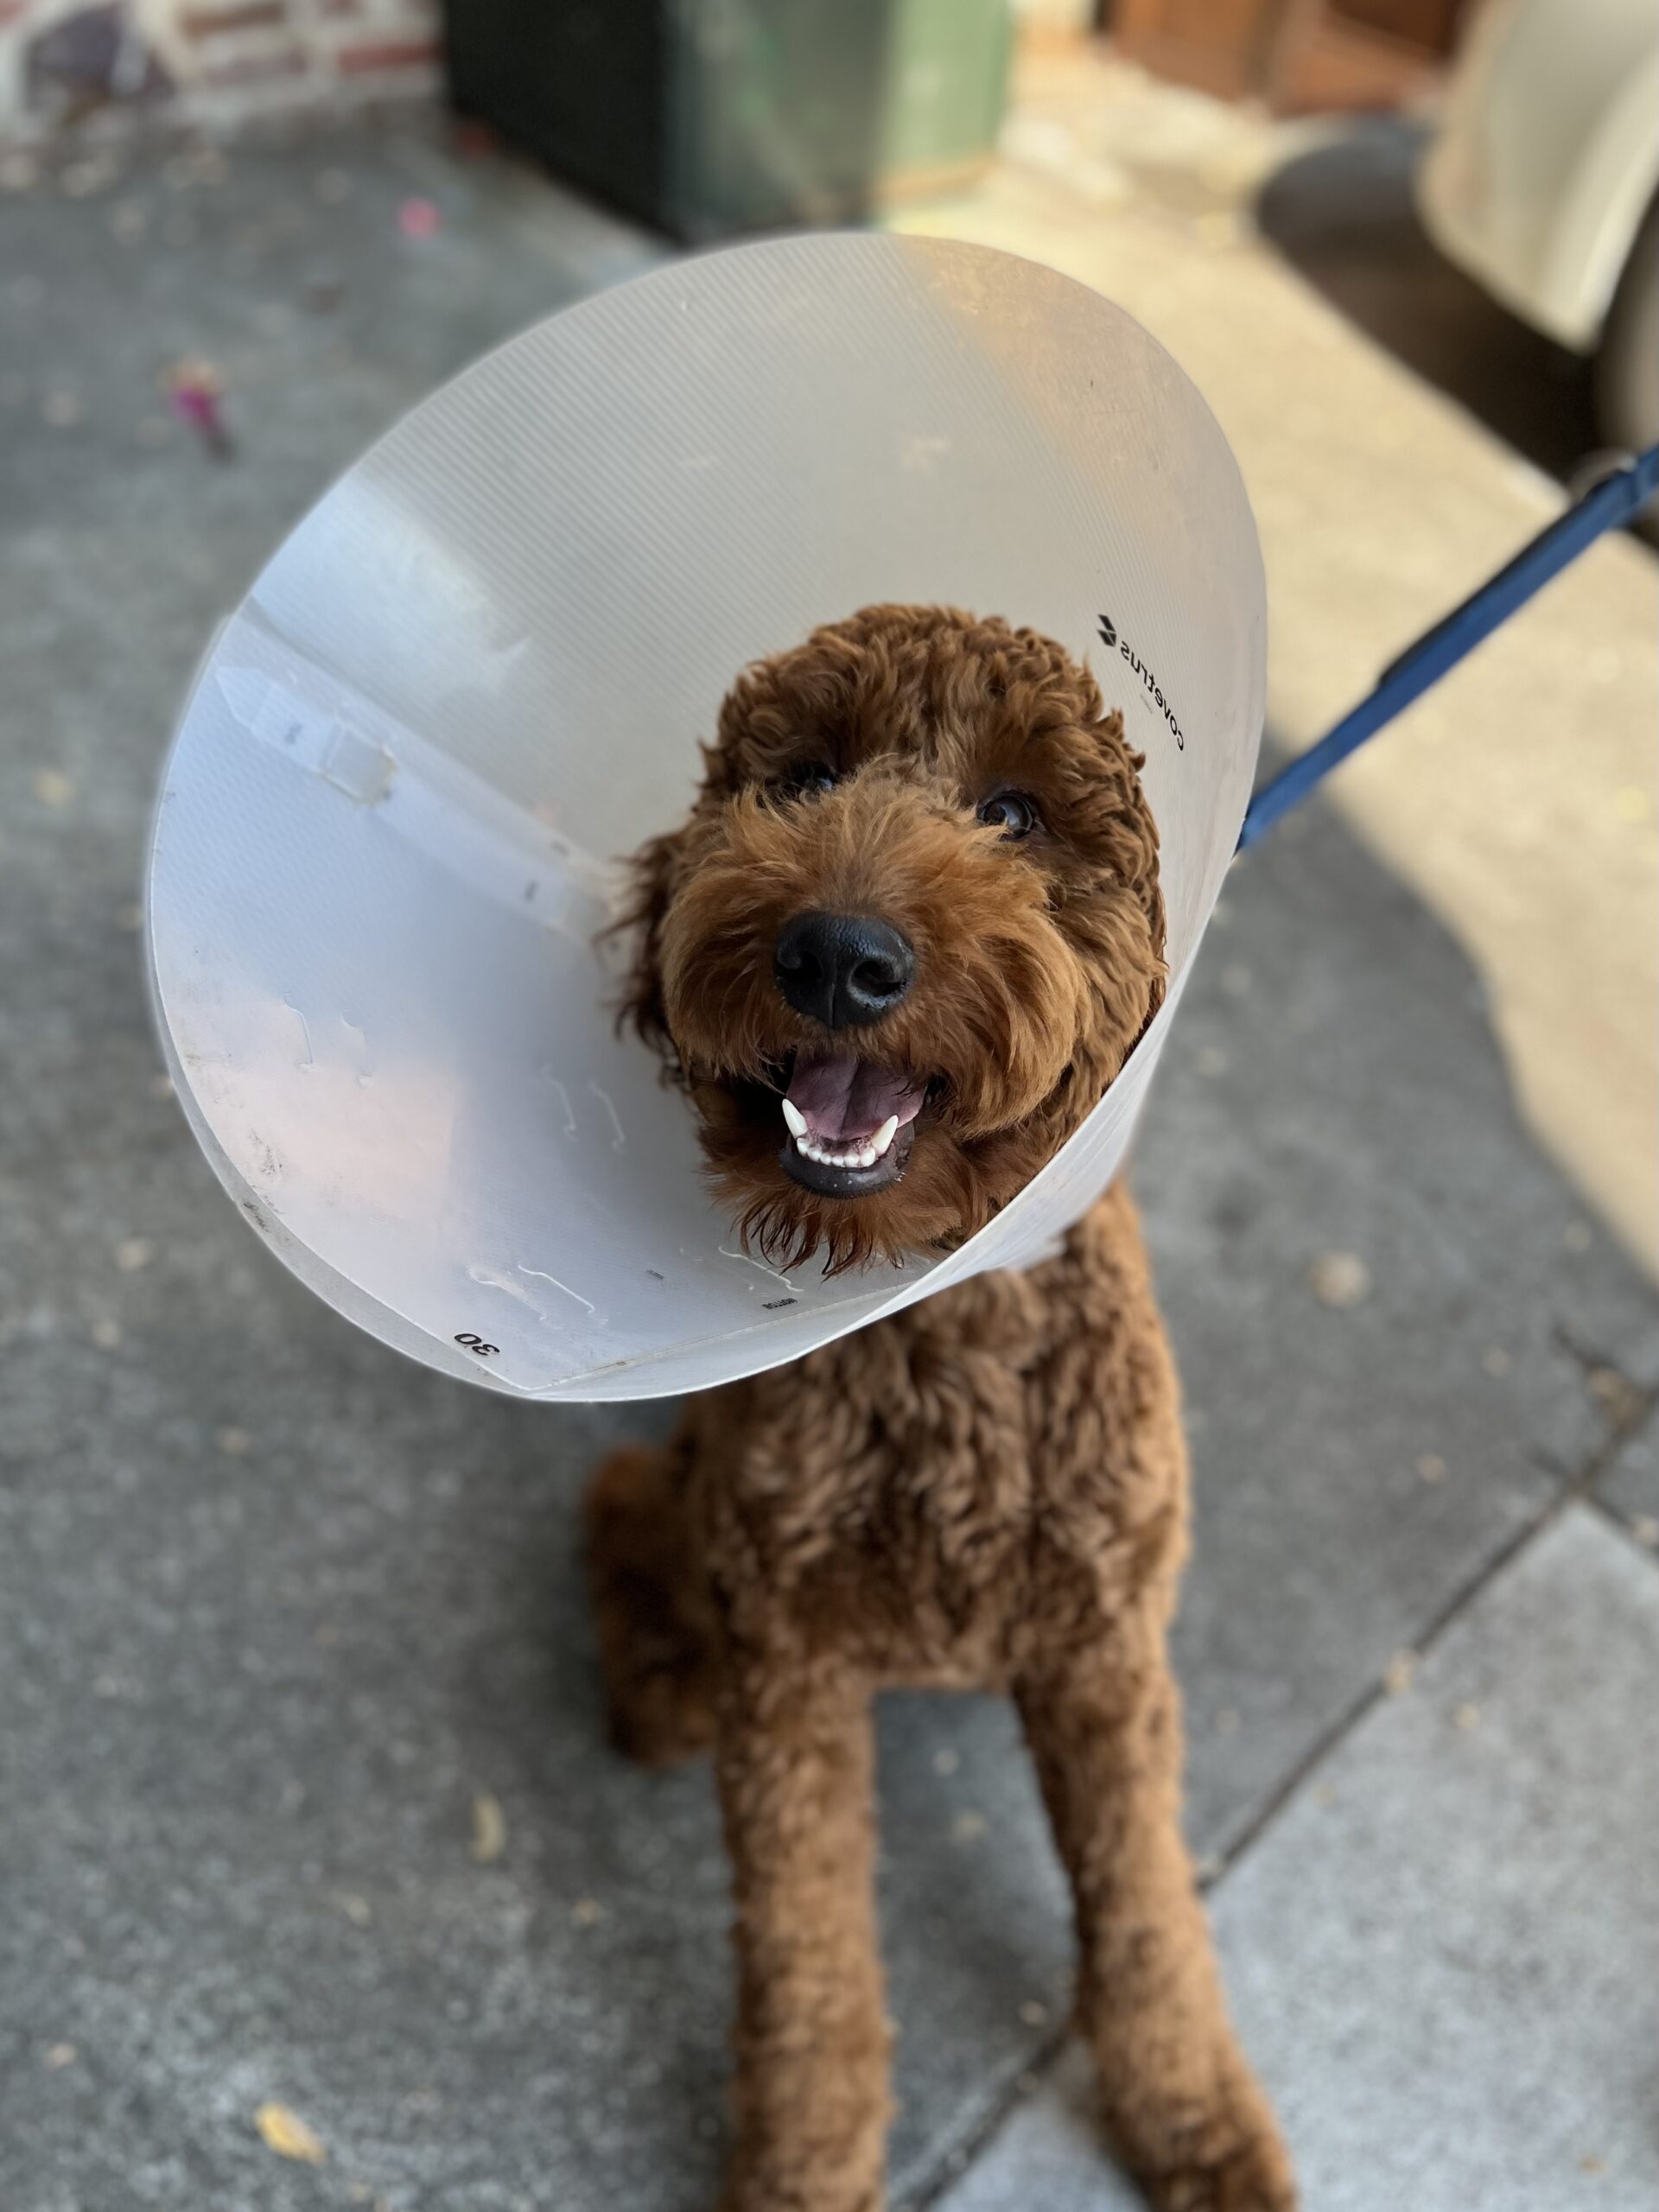 Dark Golden Retriever Poodle Mix In Cone Of Shame